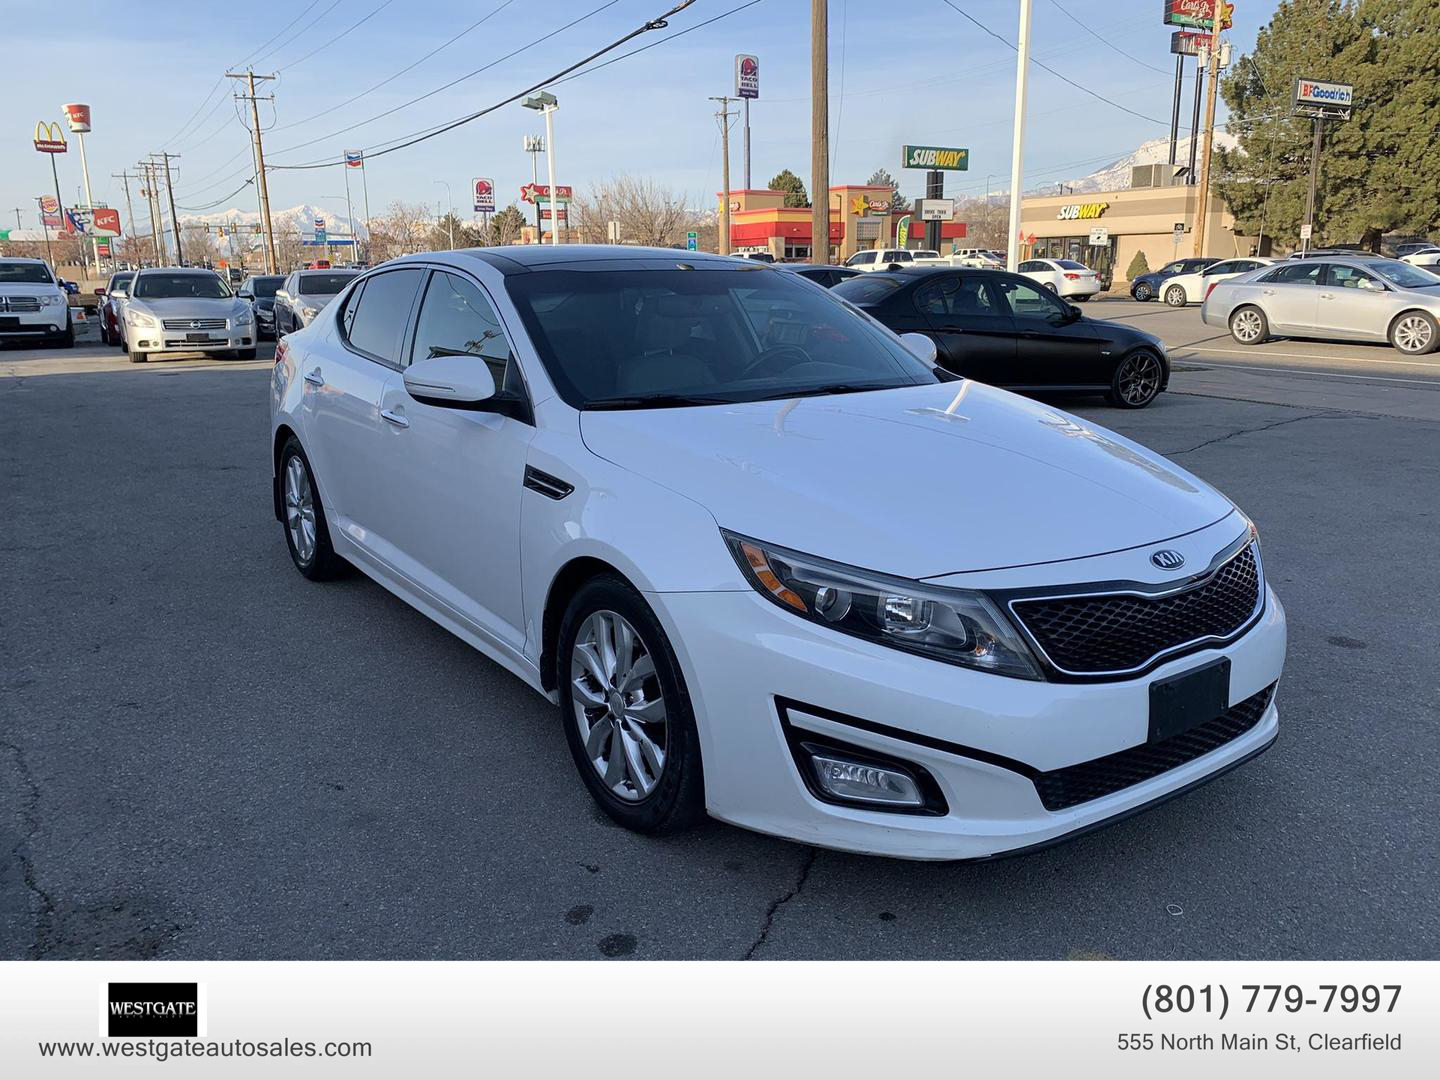 USED KIA OPTIMA 2014 for sale in Clearfield, UT | Westgate Auto Sales